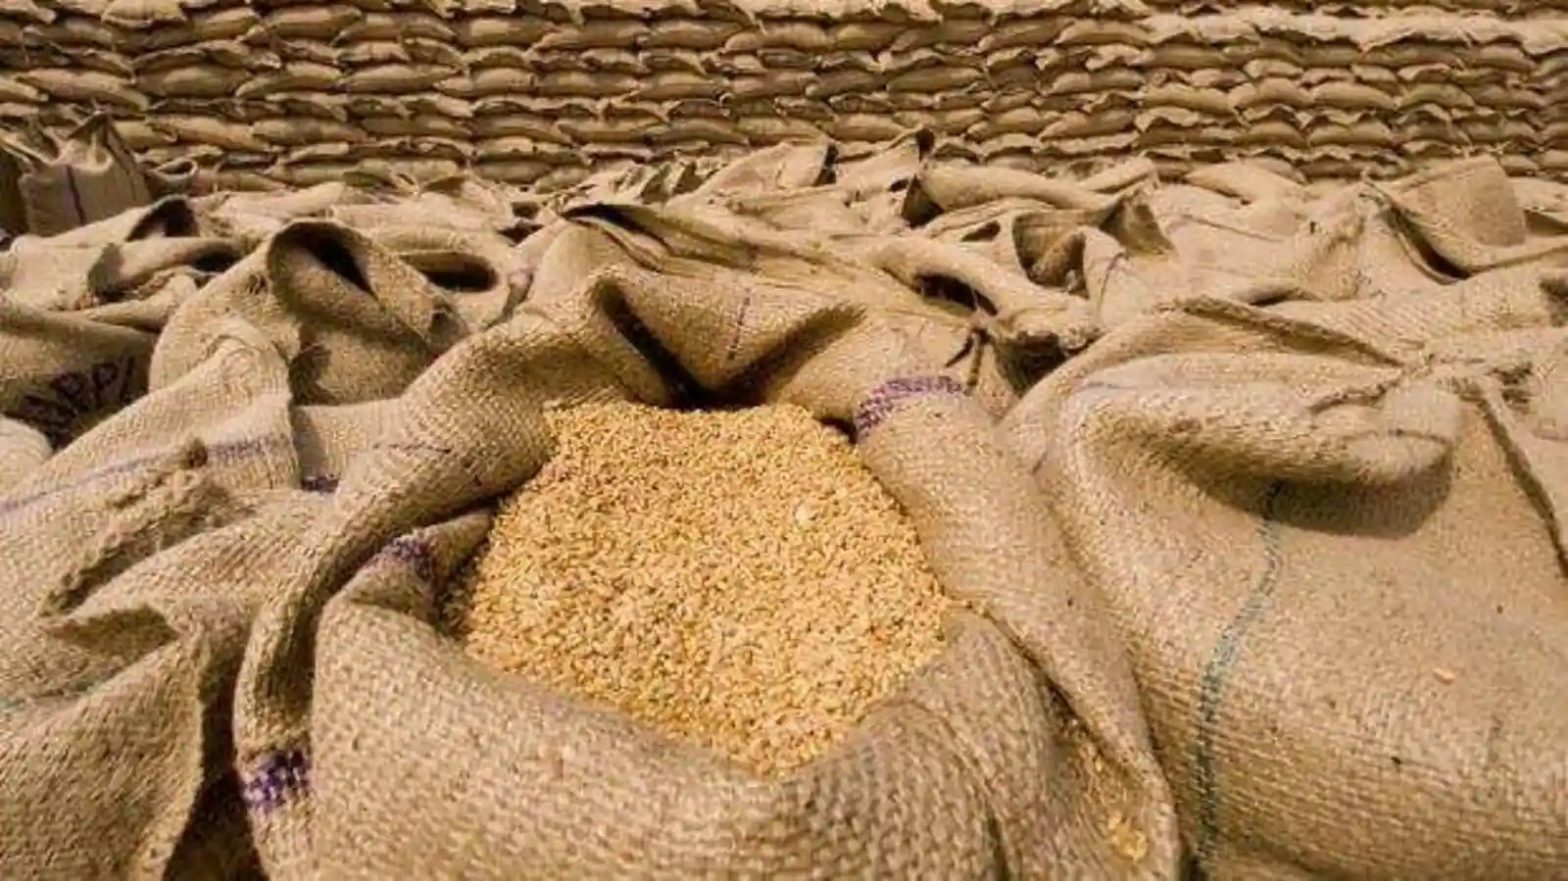 Govt offloads 5.08 lakh ton wheat in third round of e-auction